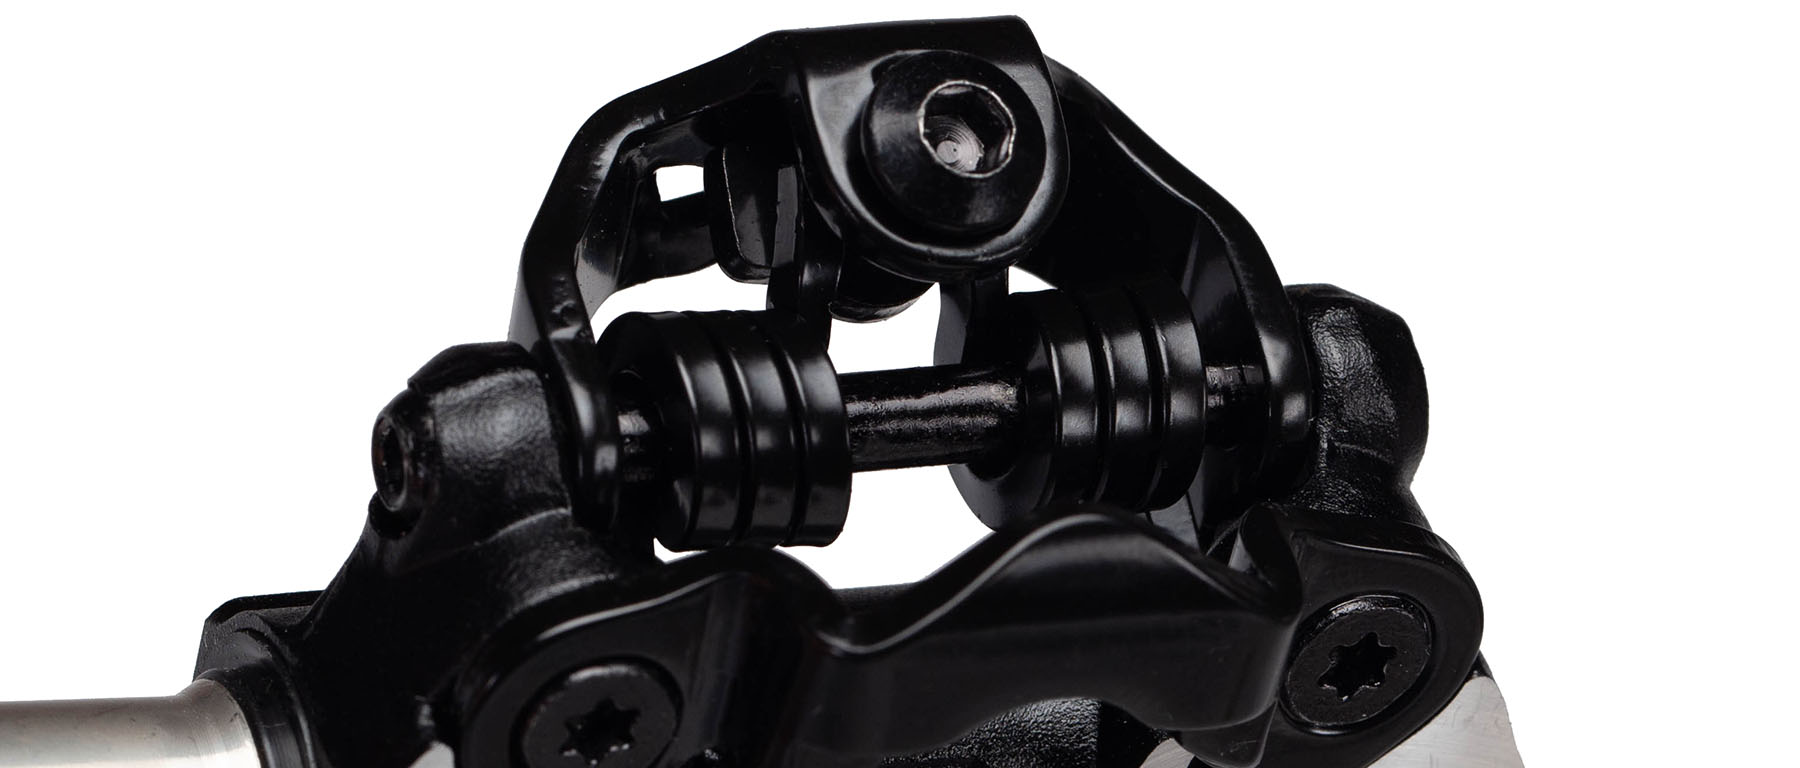 Ritchey WCS V6 XC Pedals